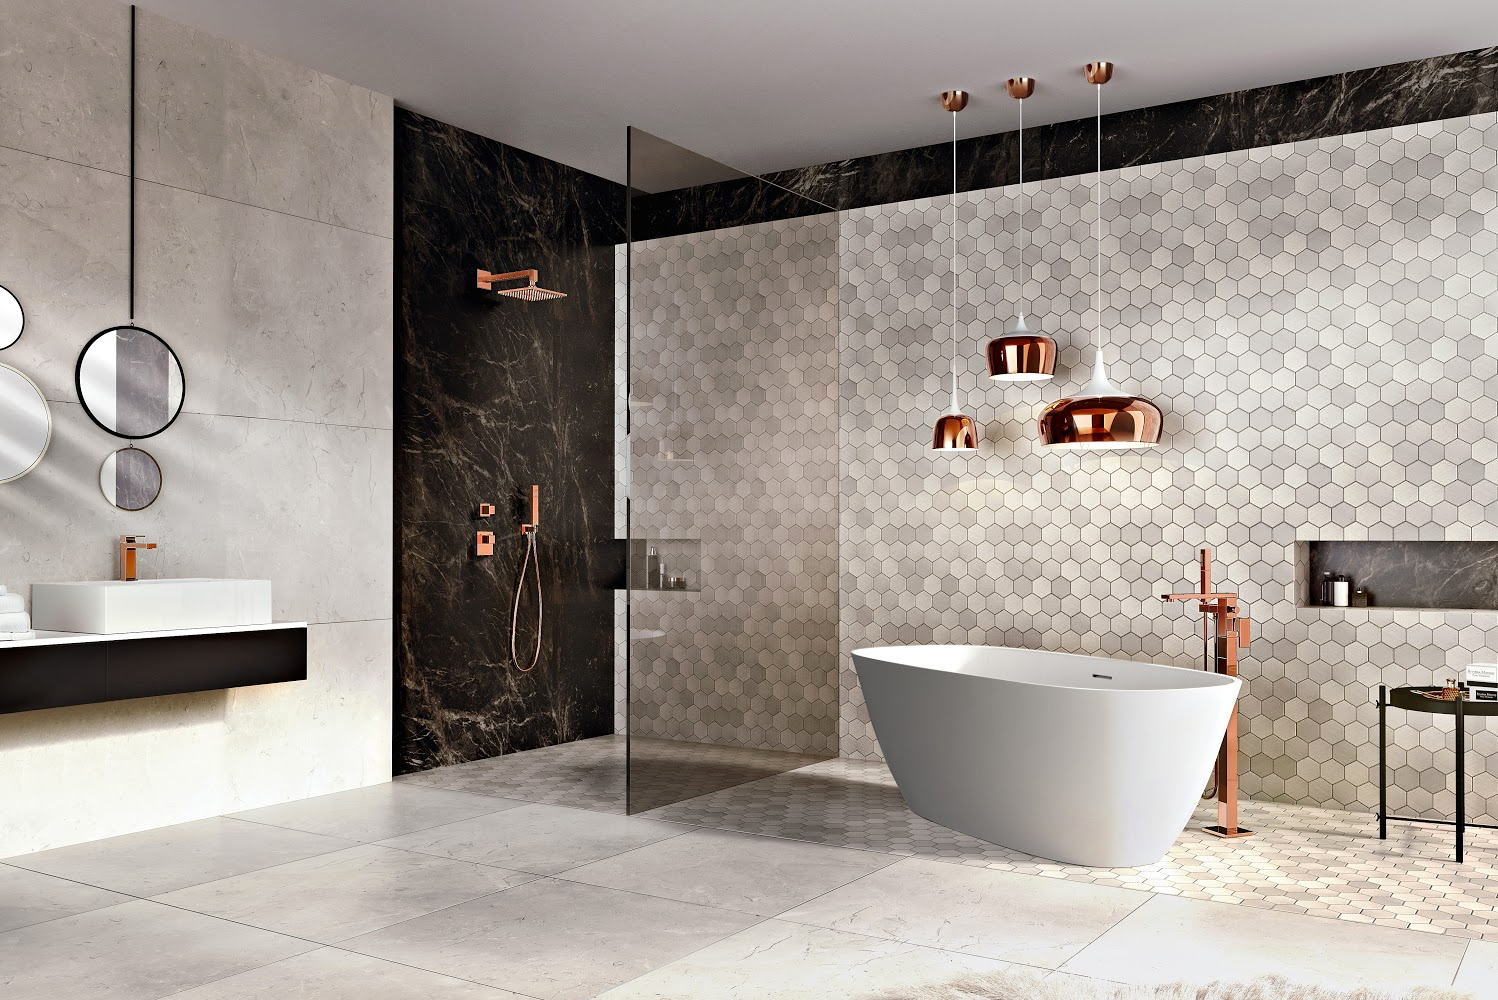 Graff manufacturer of kitchen and bath products unveiled the Incanto collection 